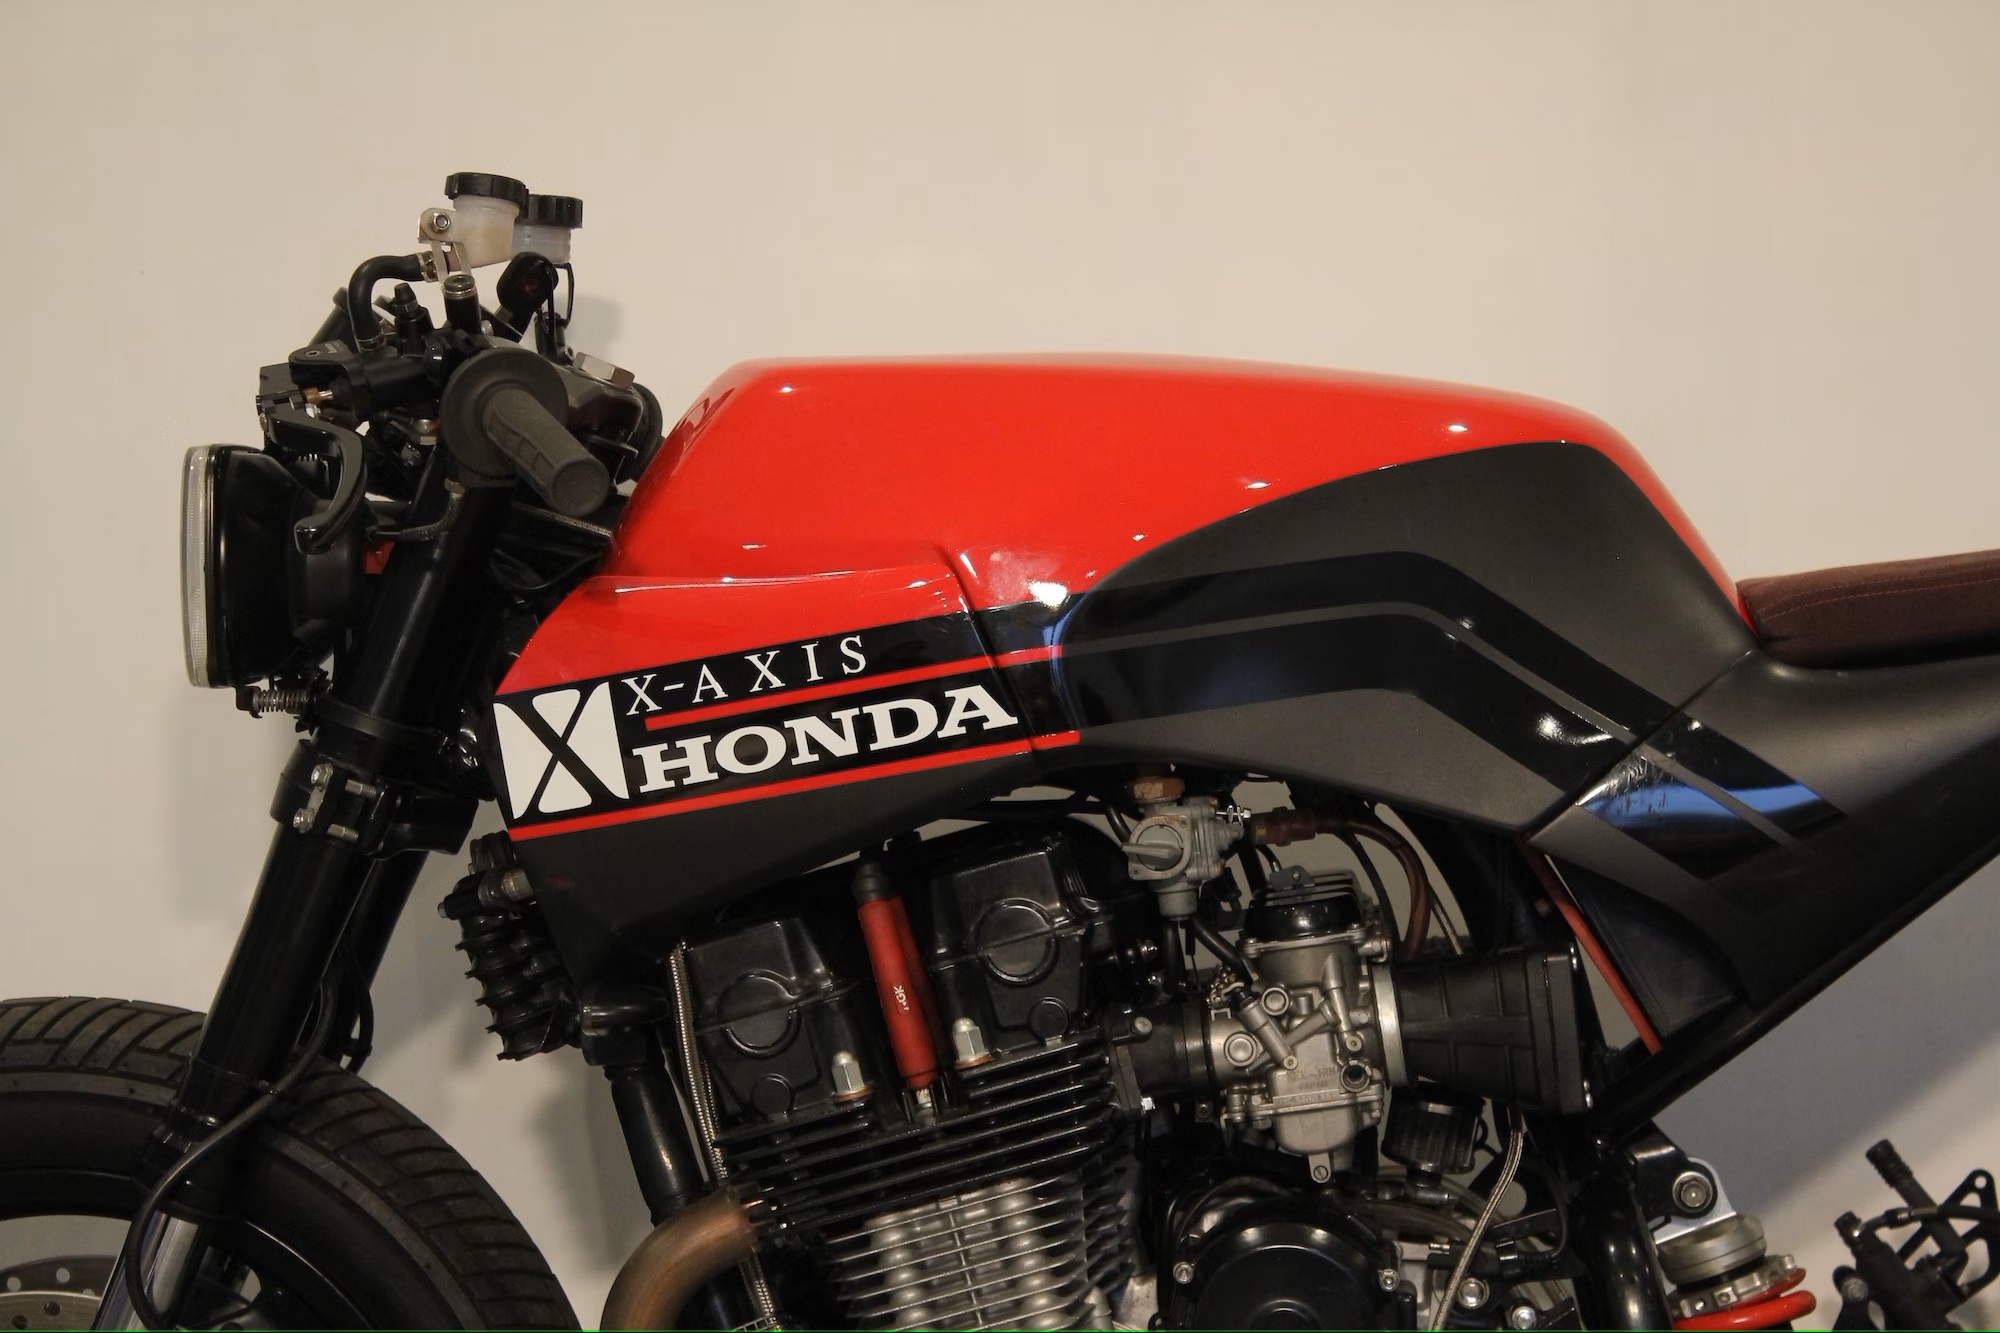 1987 Honda CBX 750 F specifications and pictures